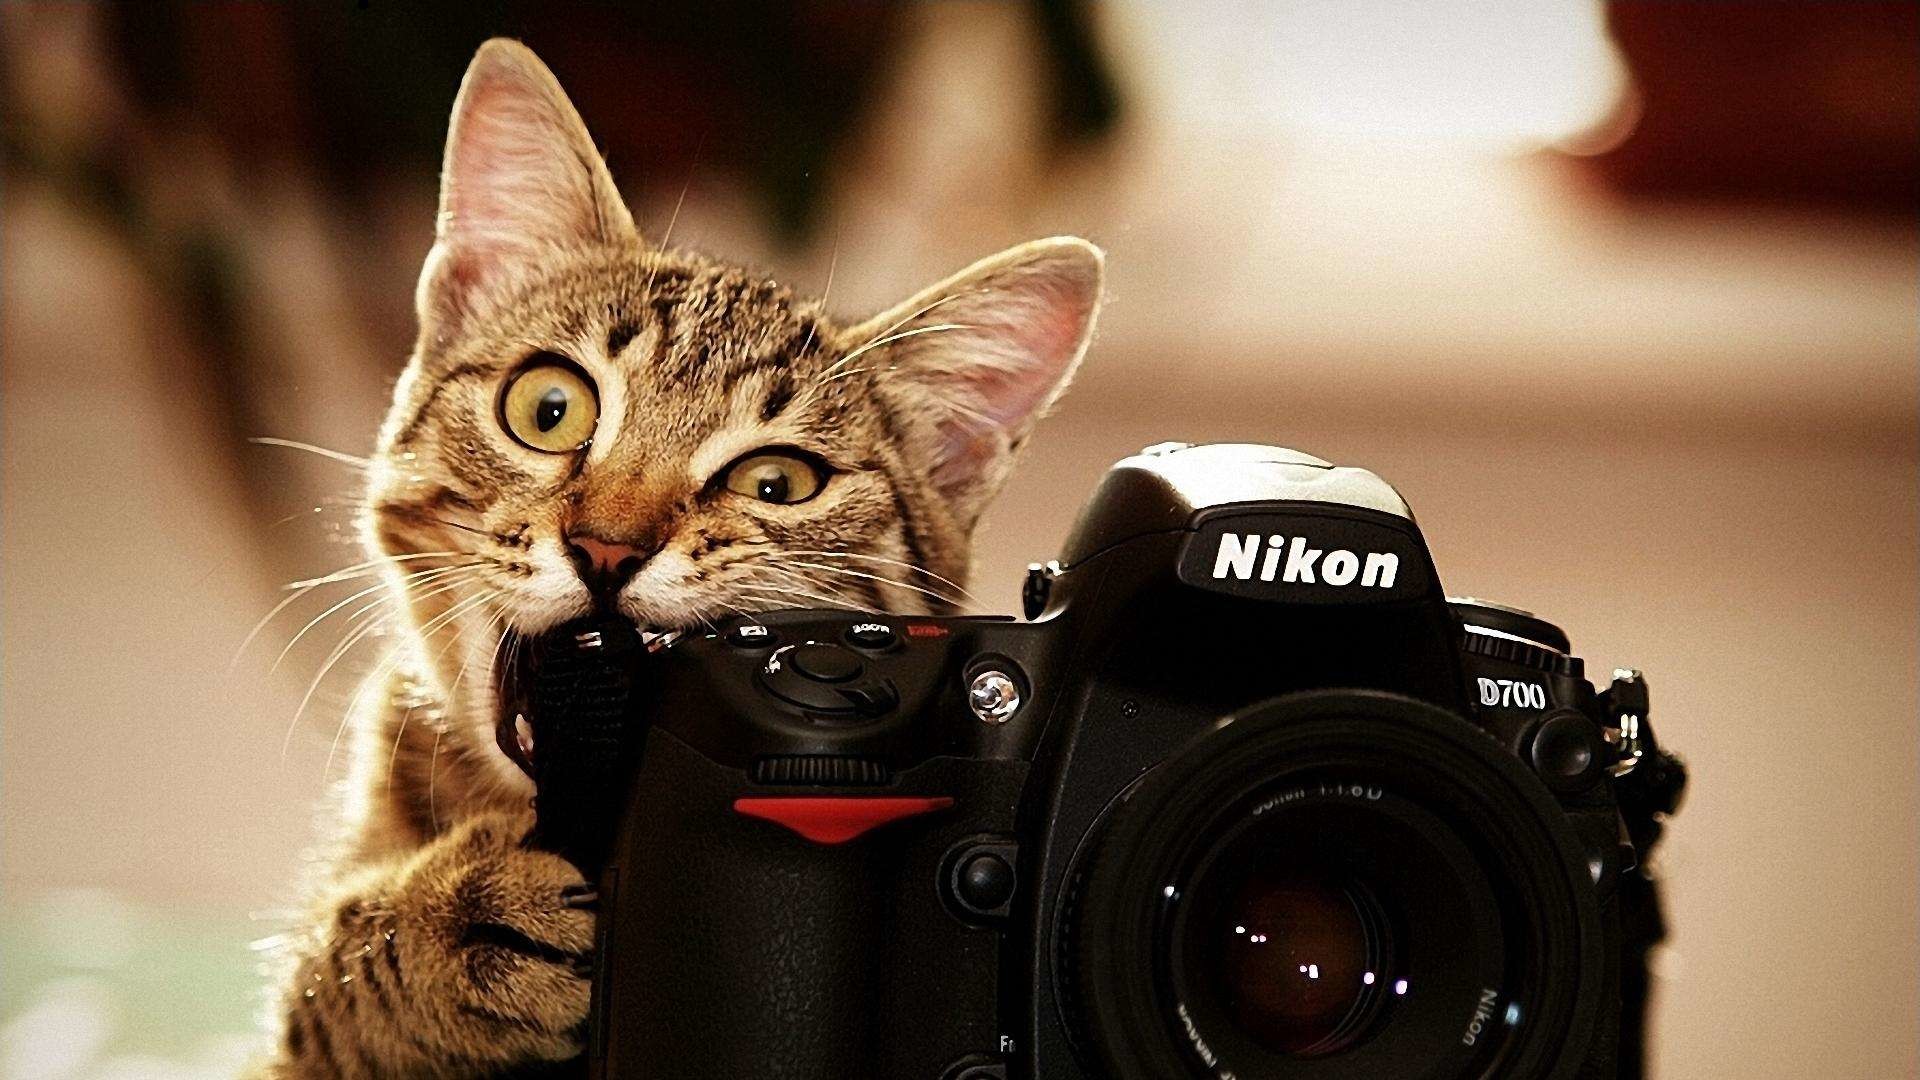 Nikon Camera for Photography HD Wallpapers  HD Wallpapers